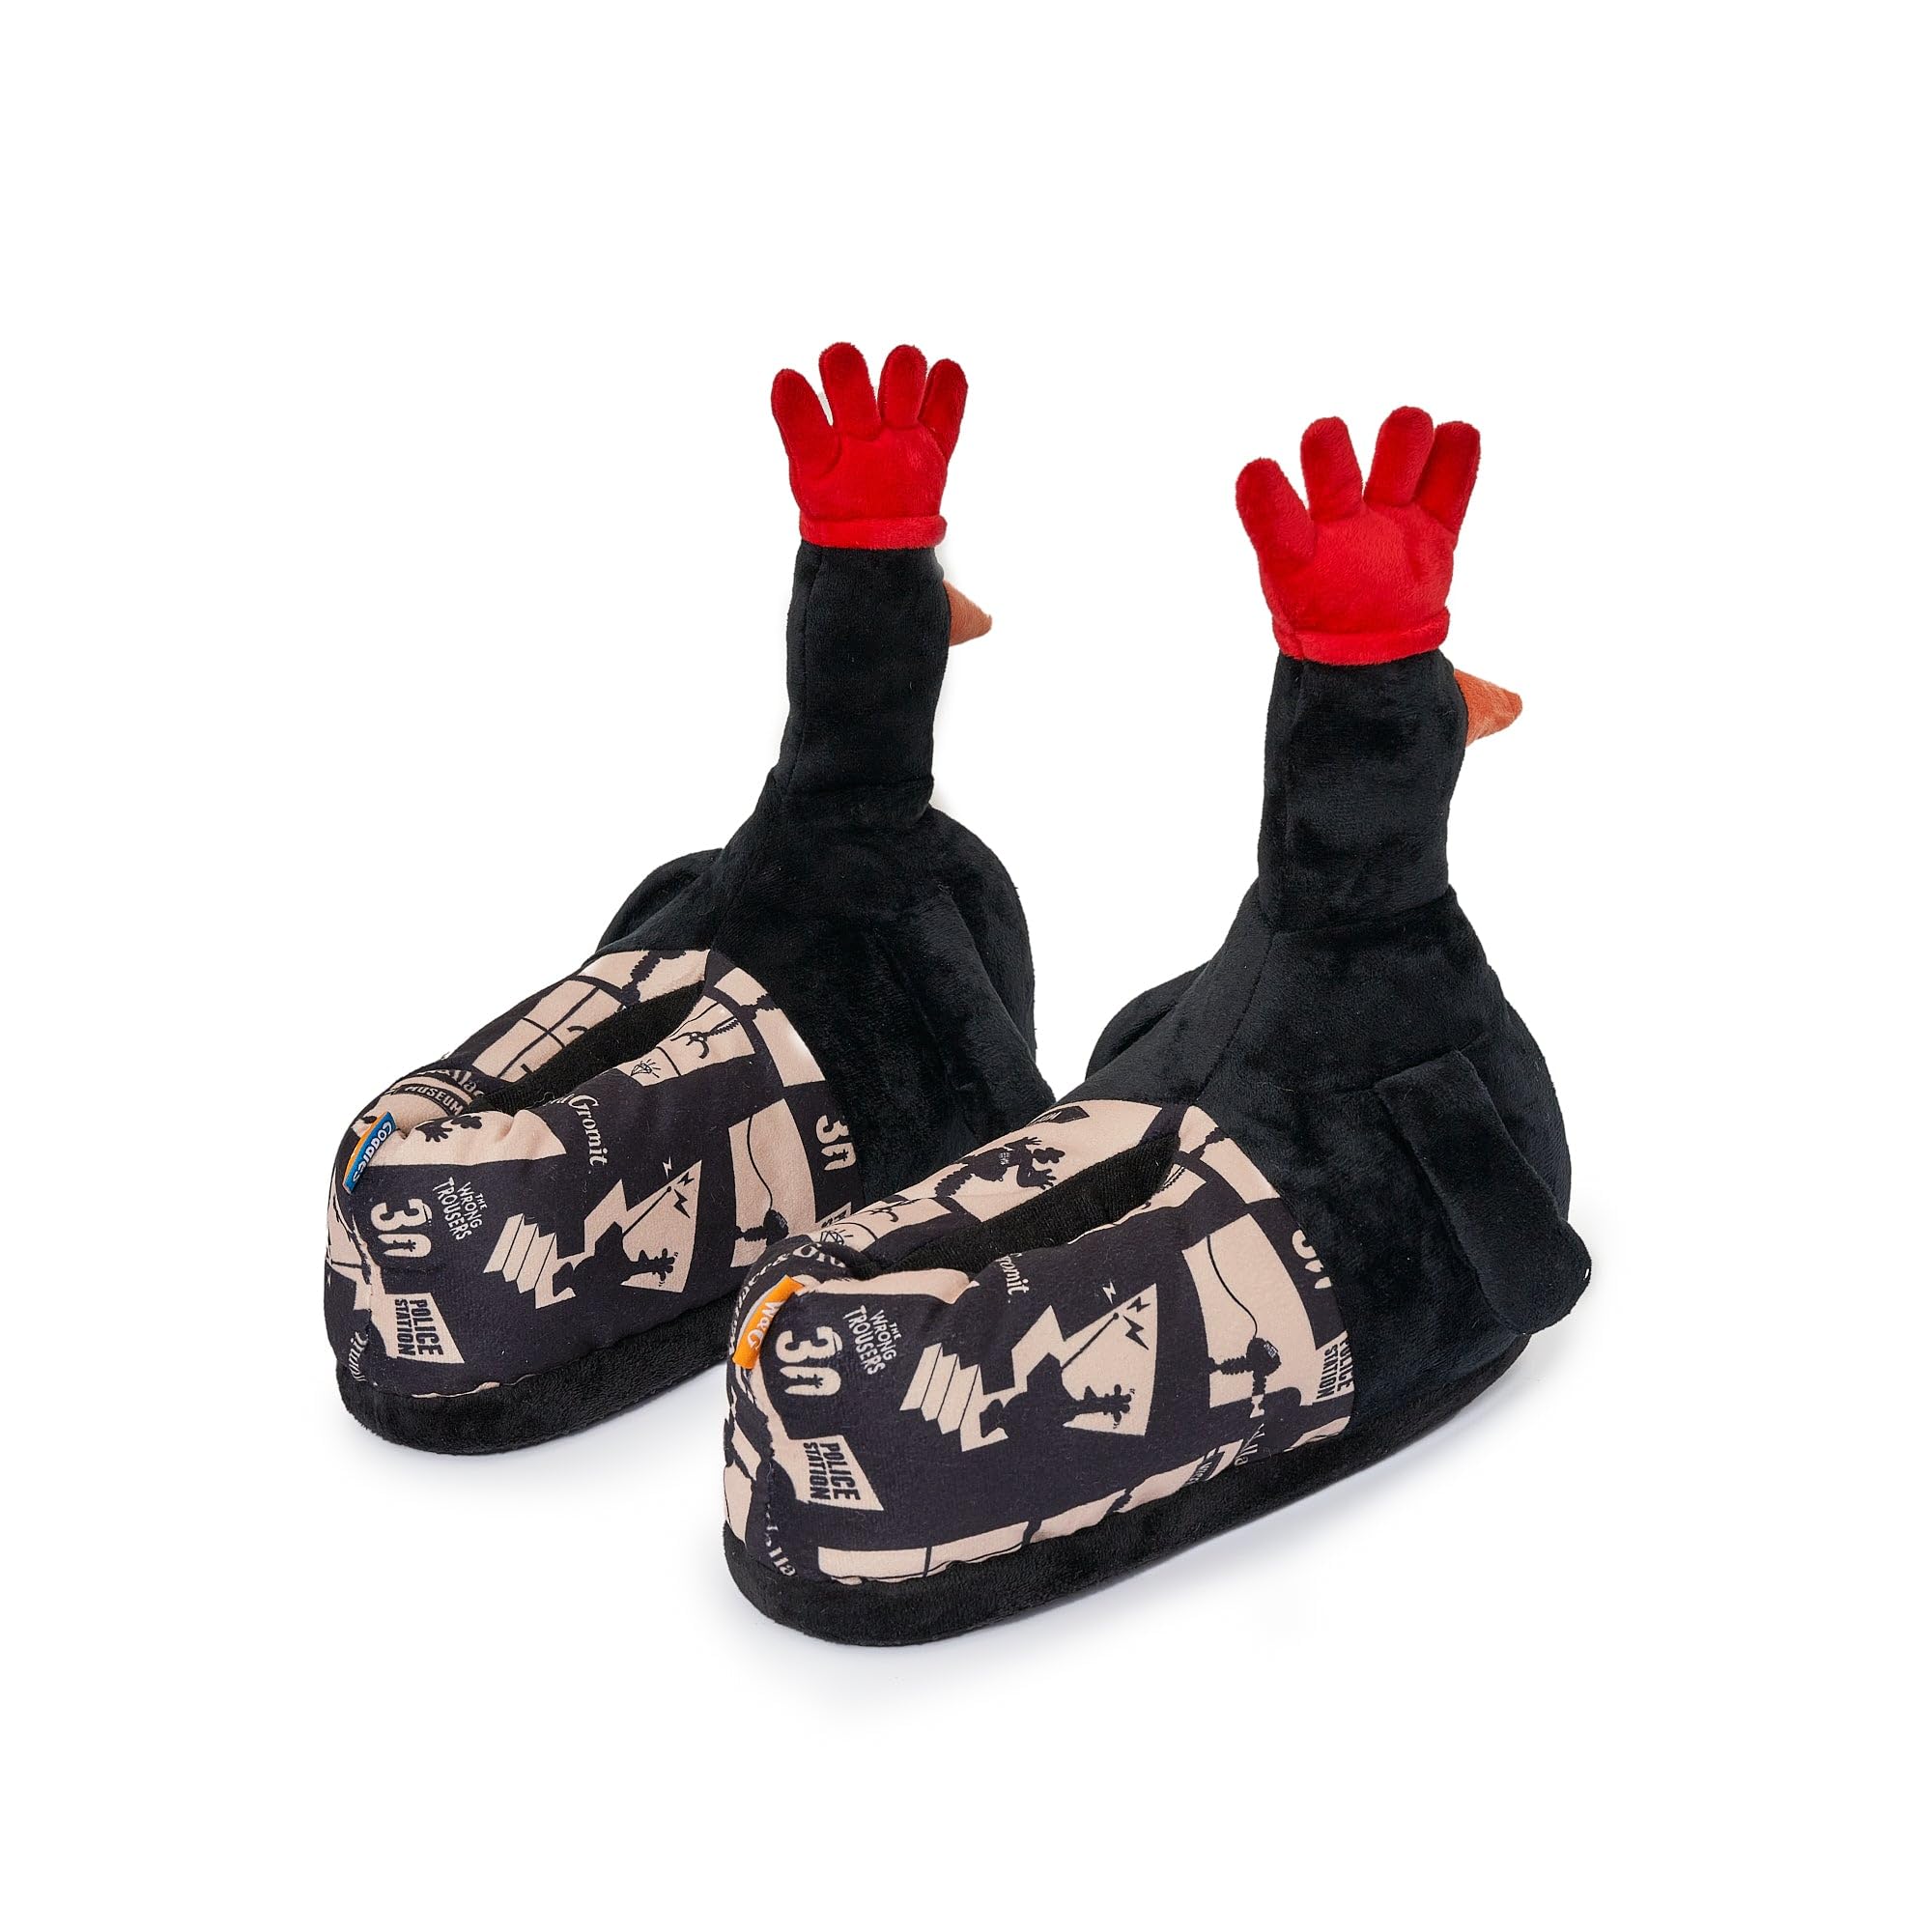 Coddies Feathers McGraw Wallace & Gromit Slippers - Penguin Plush Slippers - Aardman Gag Gift - Fun Slippers for Men, Women & Kids